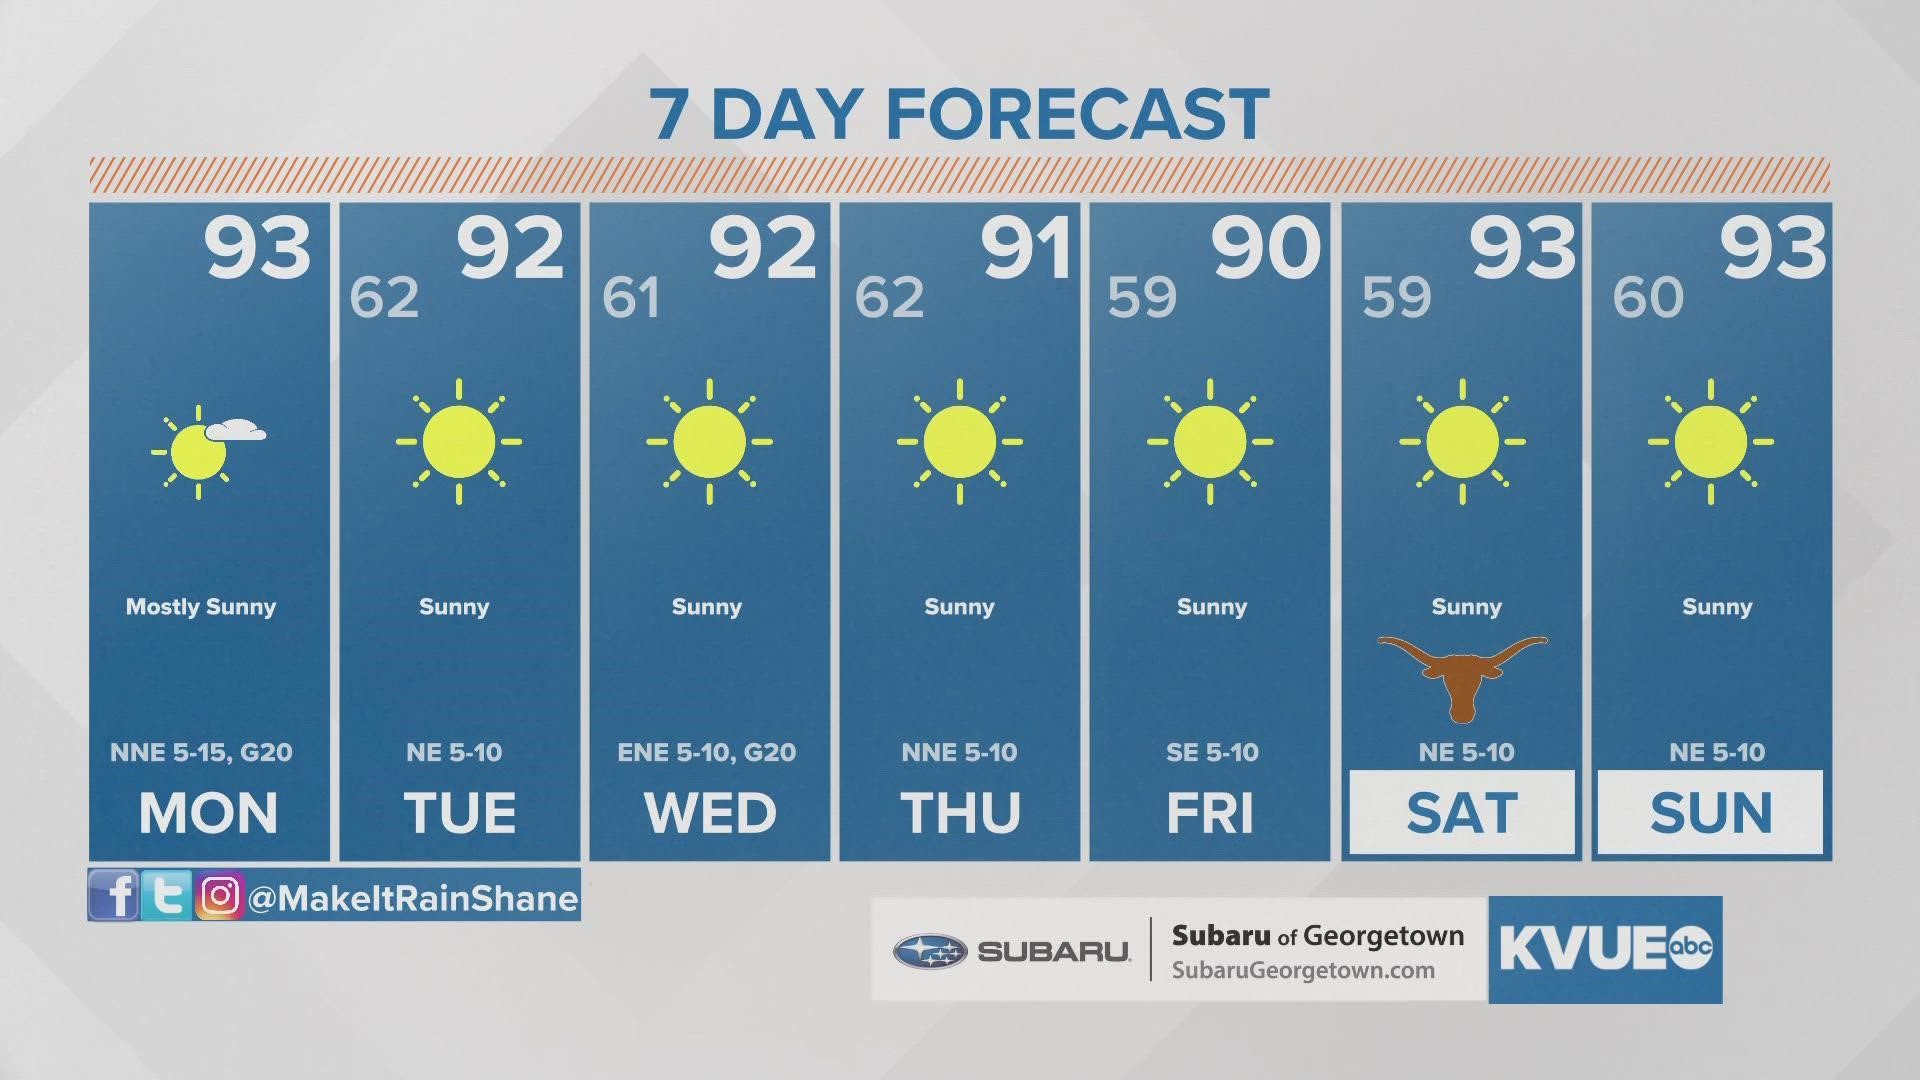 Cooler evenings expected throughout the workweek